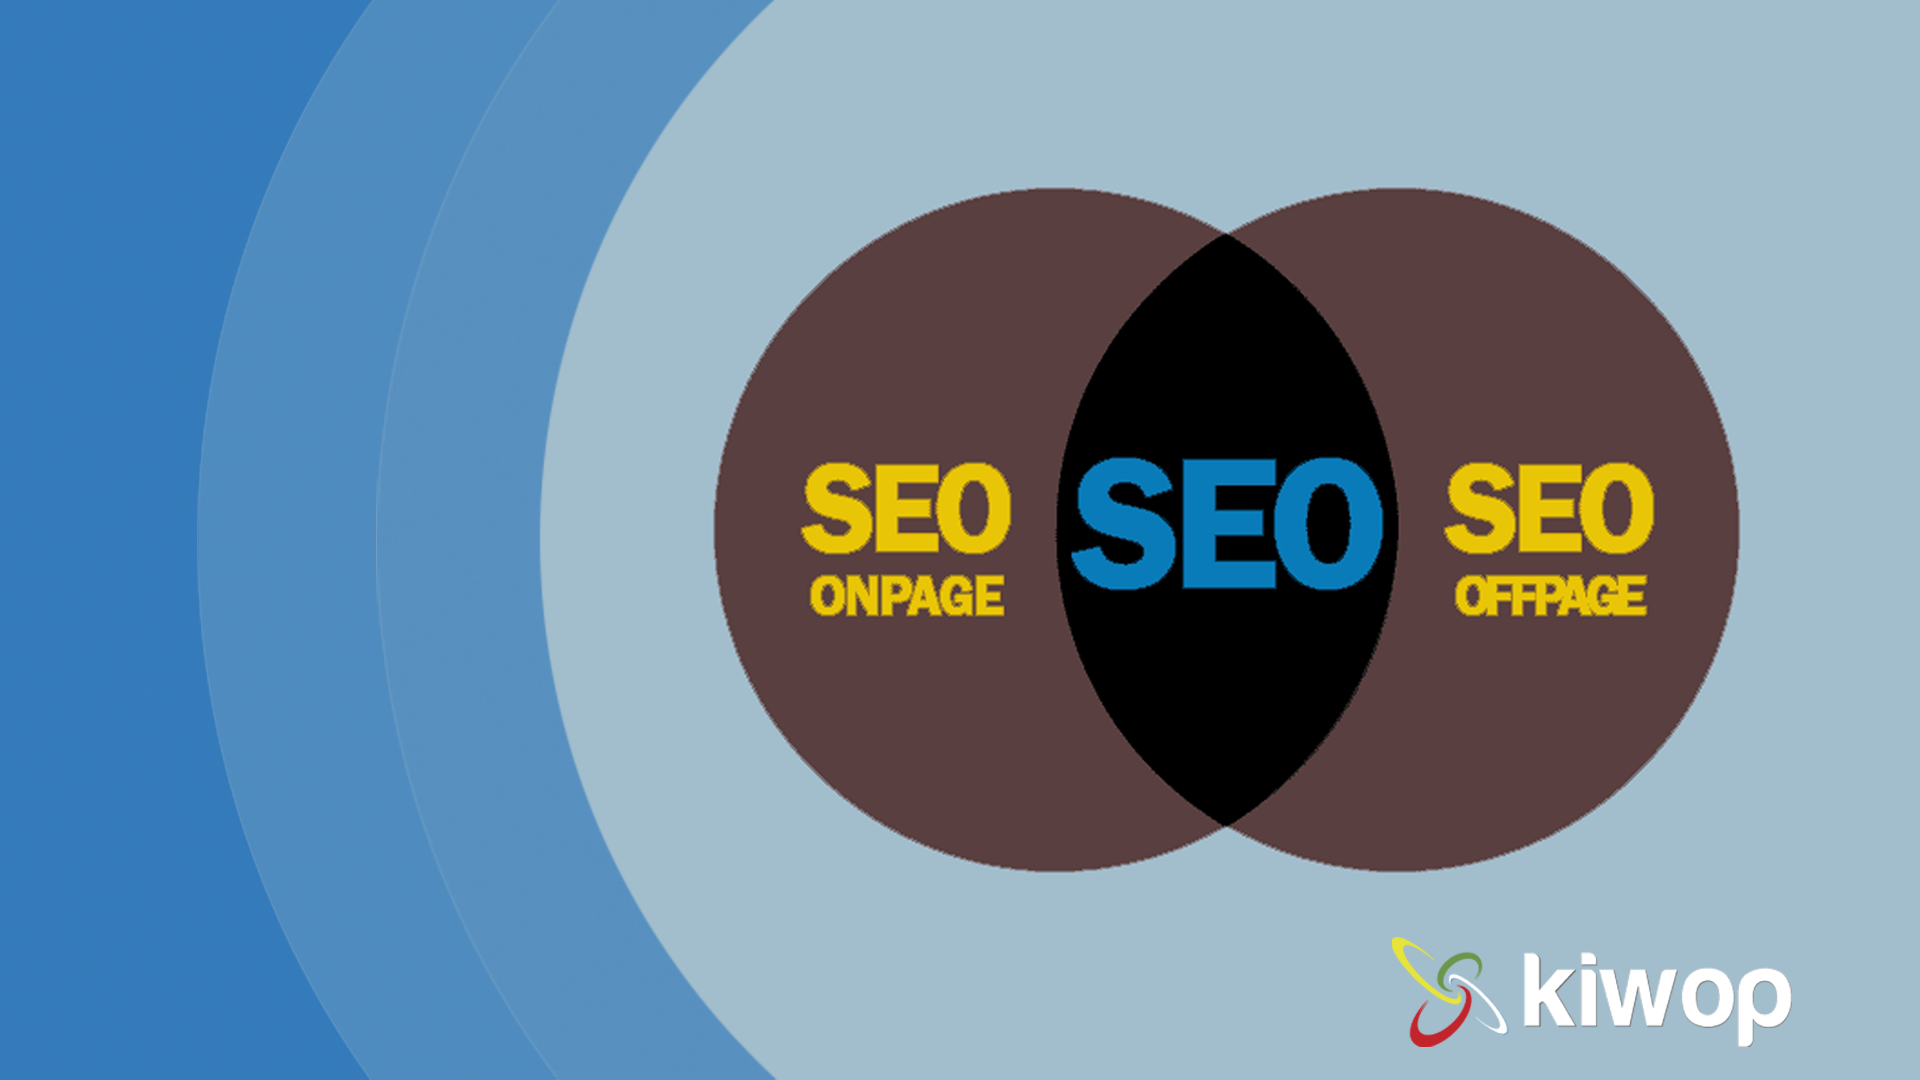 These are the differences between SEO On Page and SEO Off Page